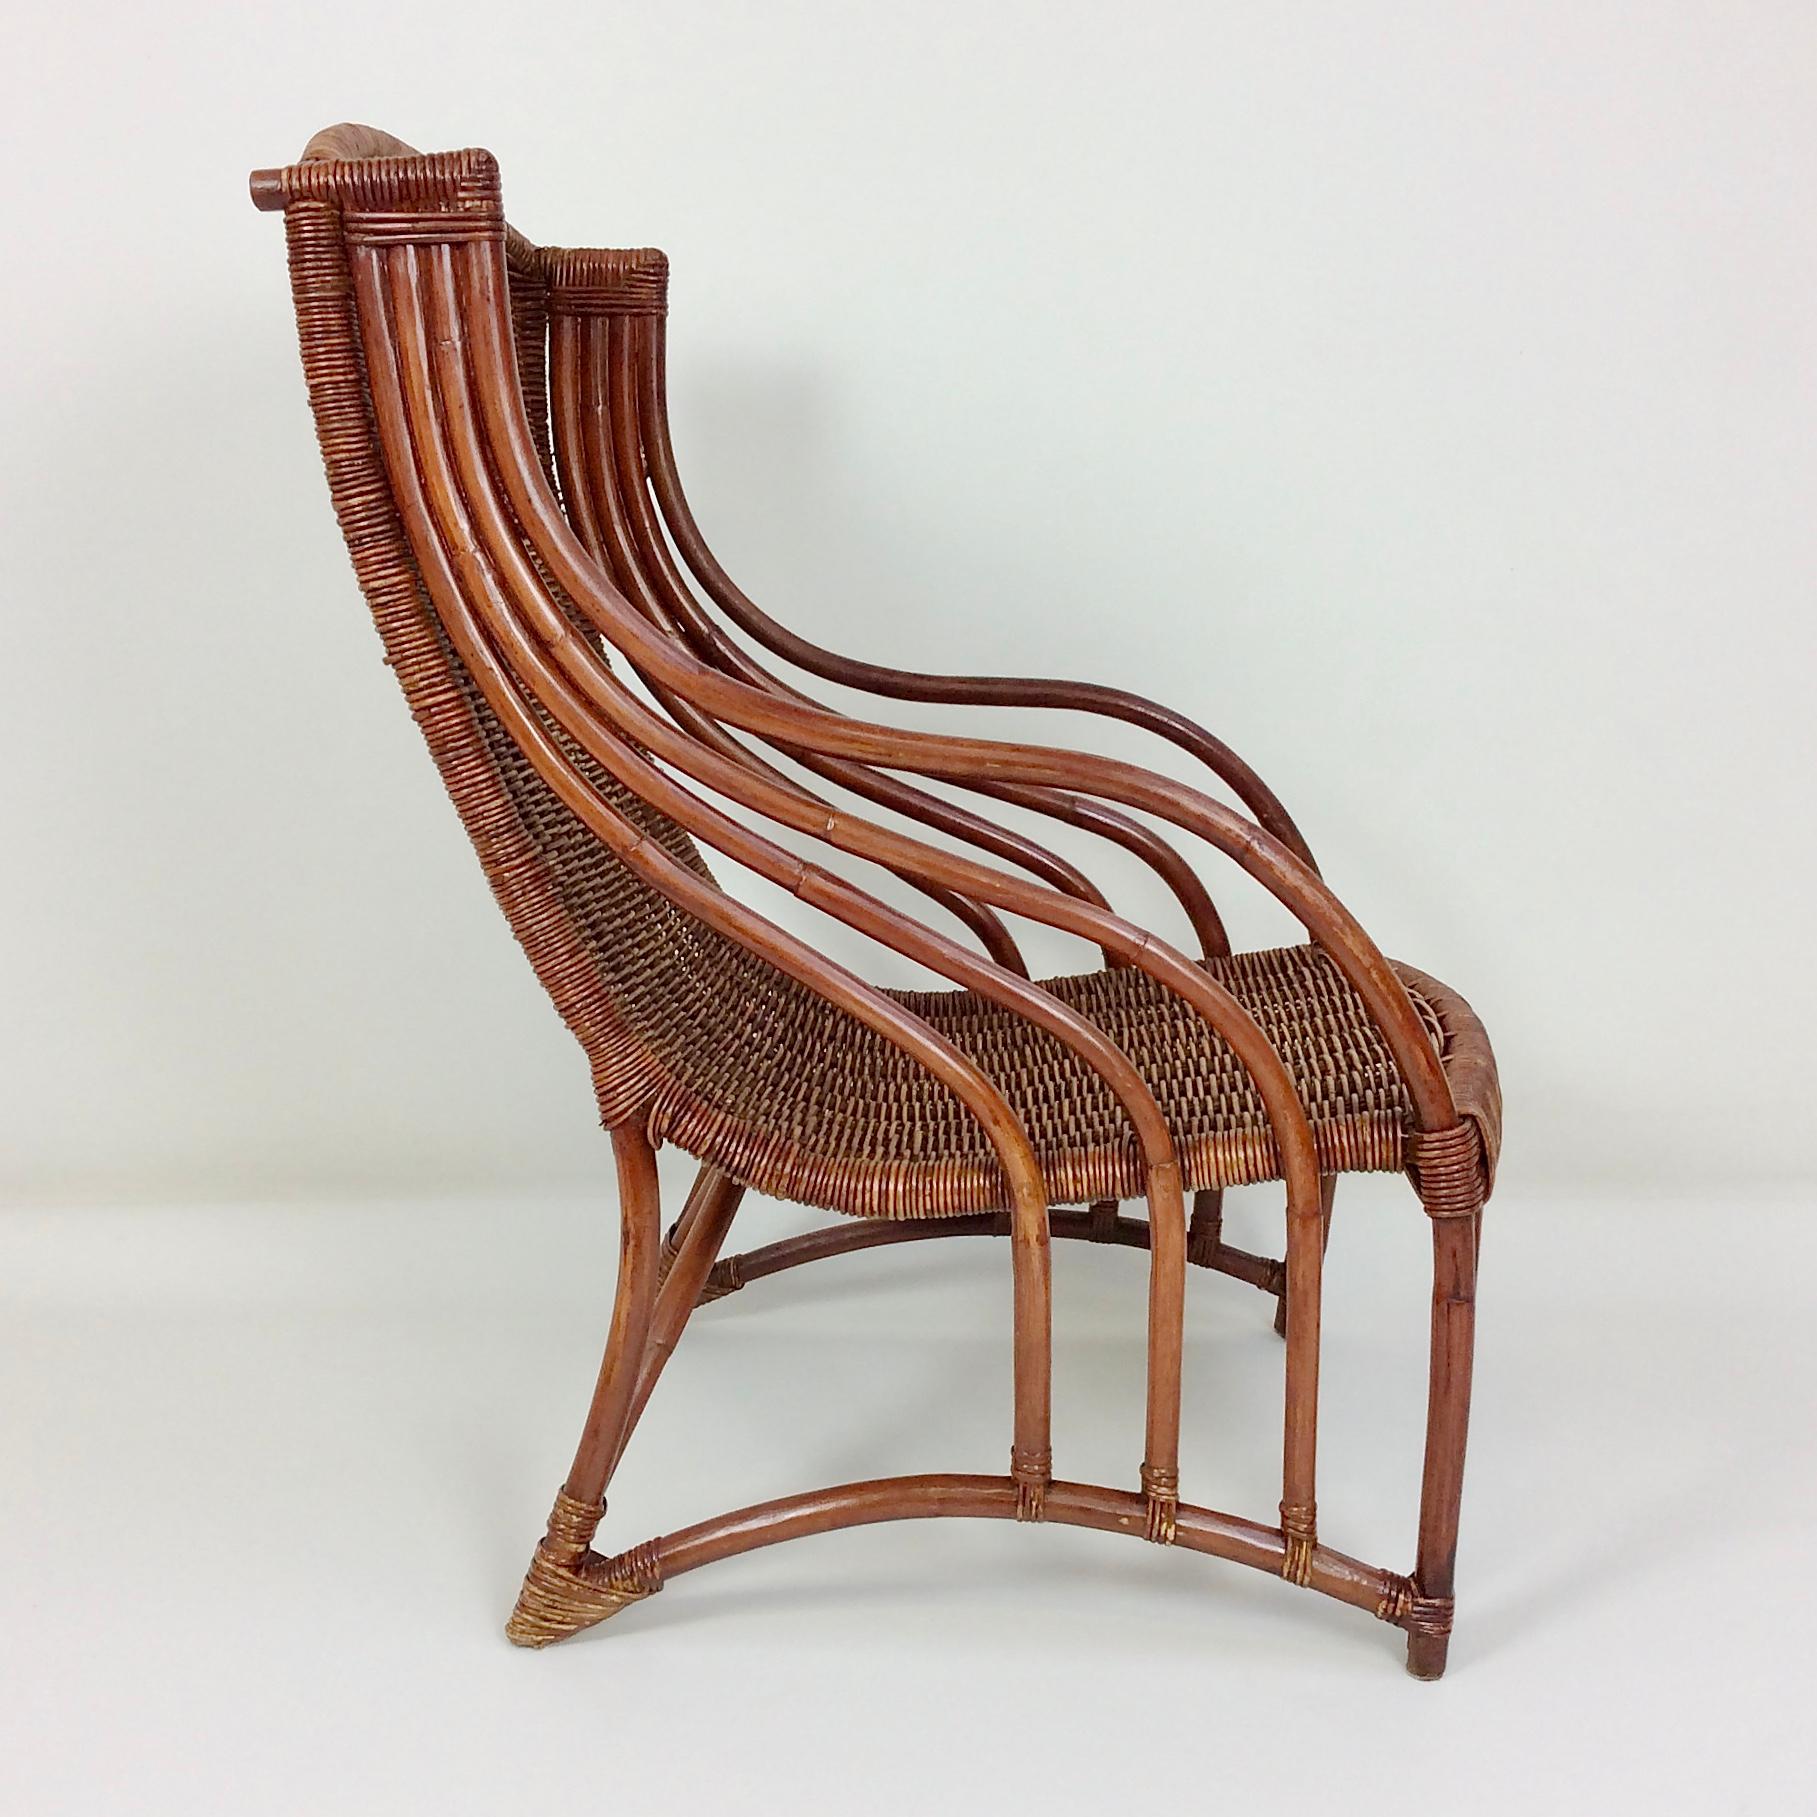 Elegant mid-century armchair, circa 1960, Italy.
Tinted bamboo and cane .
Dimensions: 97 cm H, 58 cm W, 79 cm D, seat height: 38 cm.
All purchases are covered by our Buyer Protection Guarantee.
This item can be returned within 7 days of delivery.
We